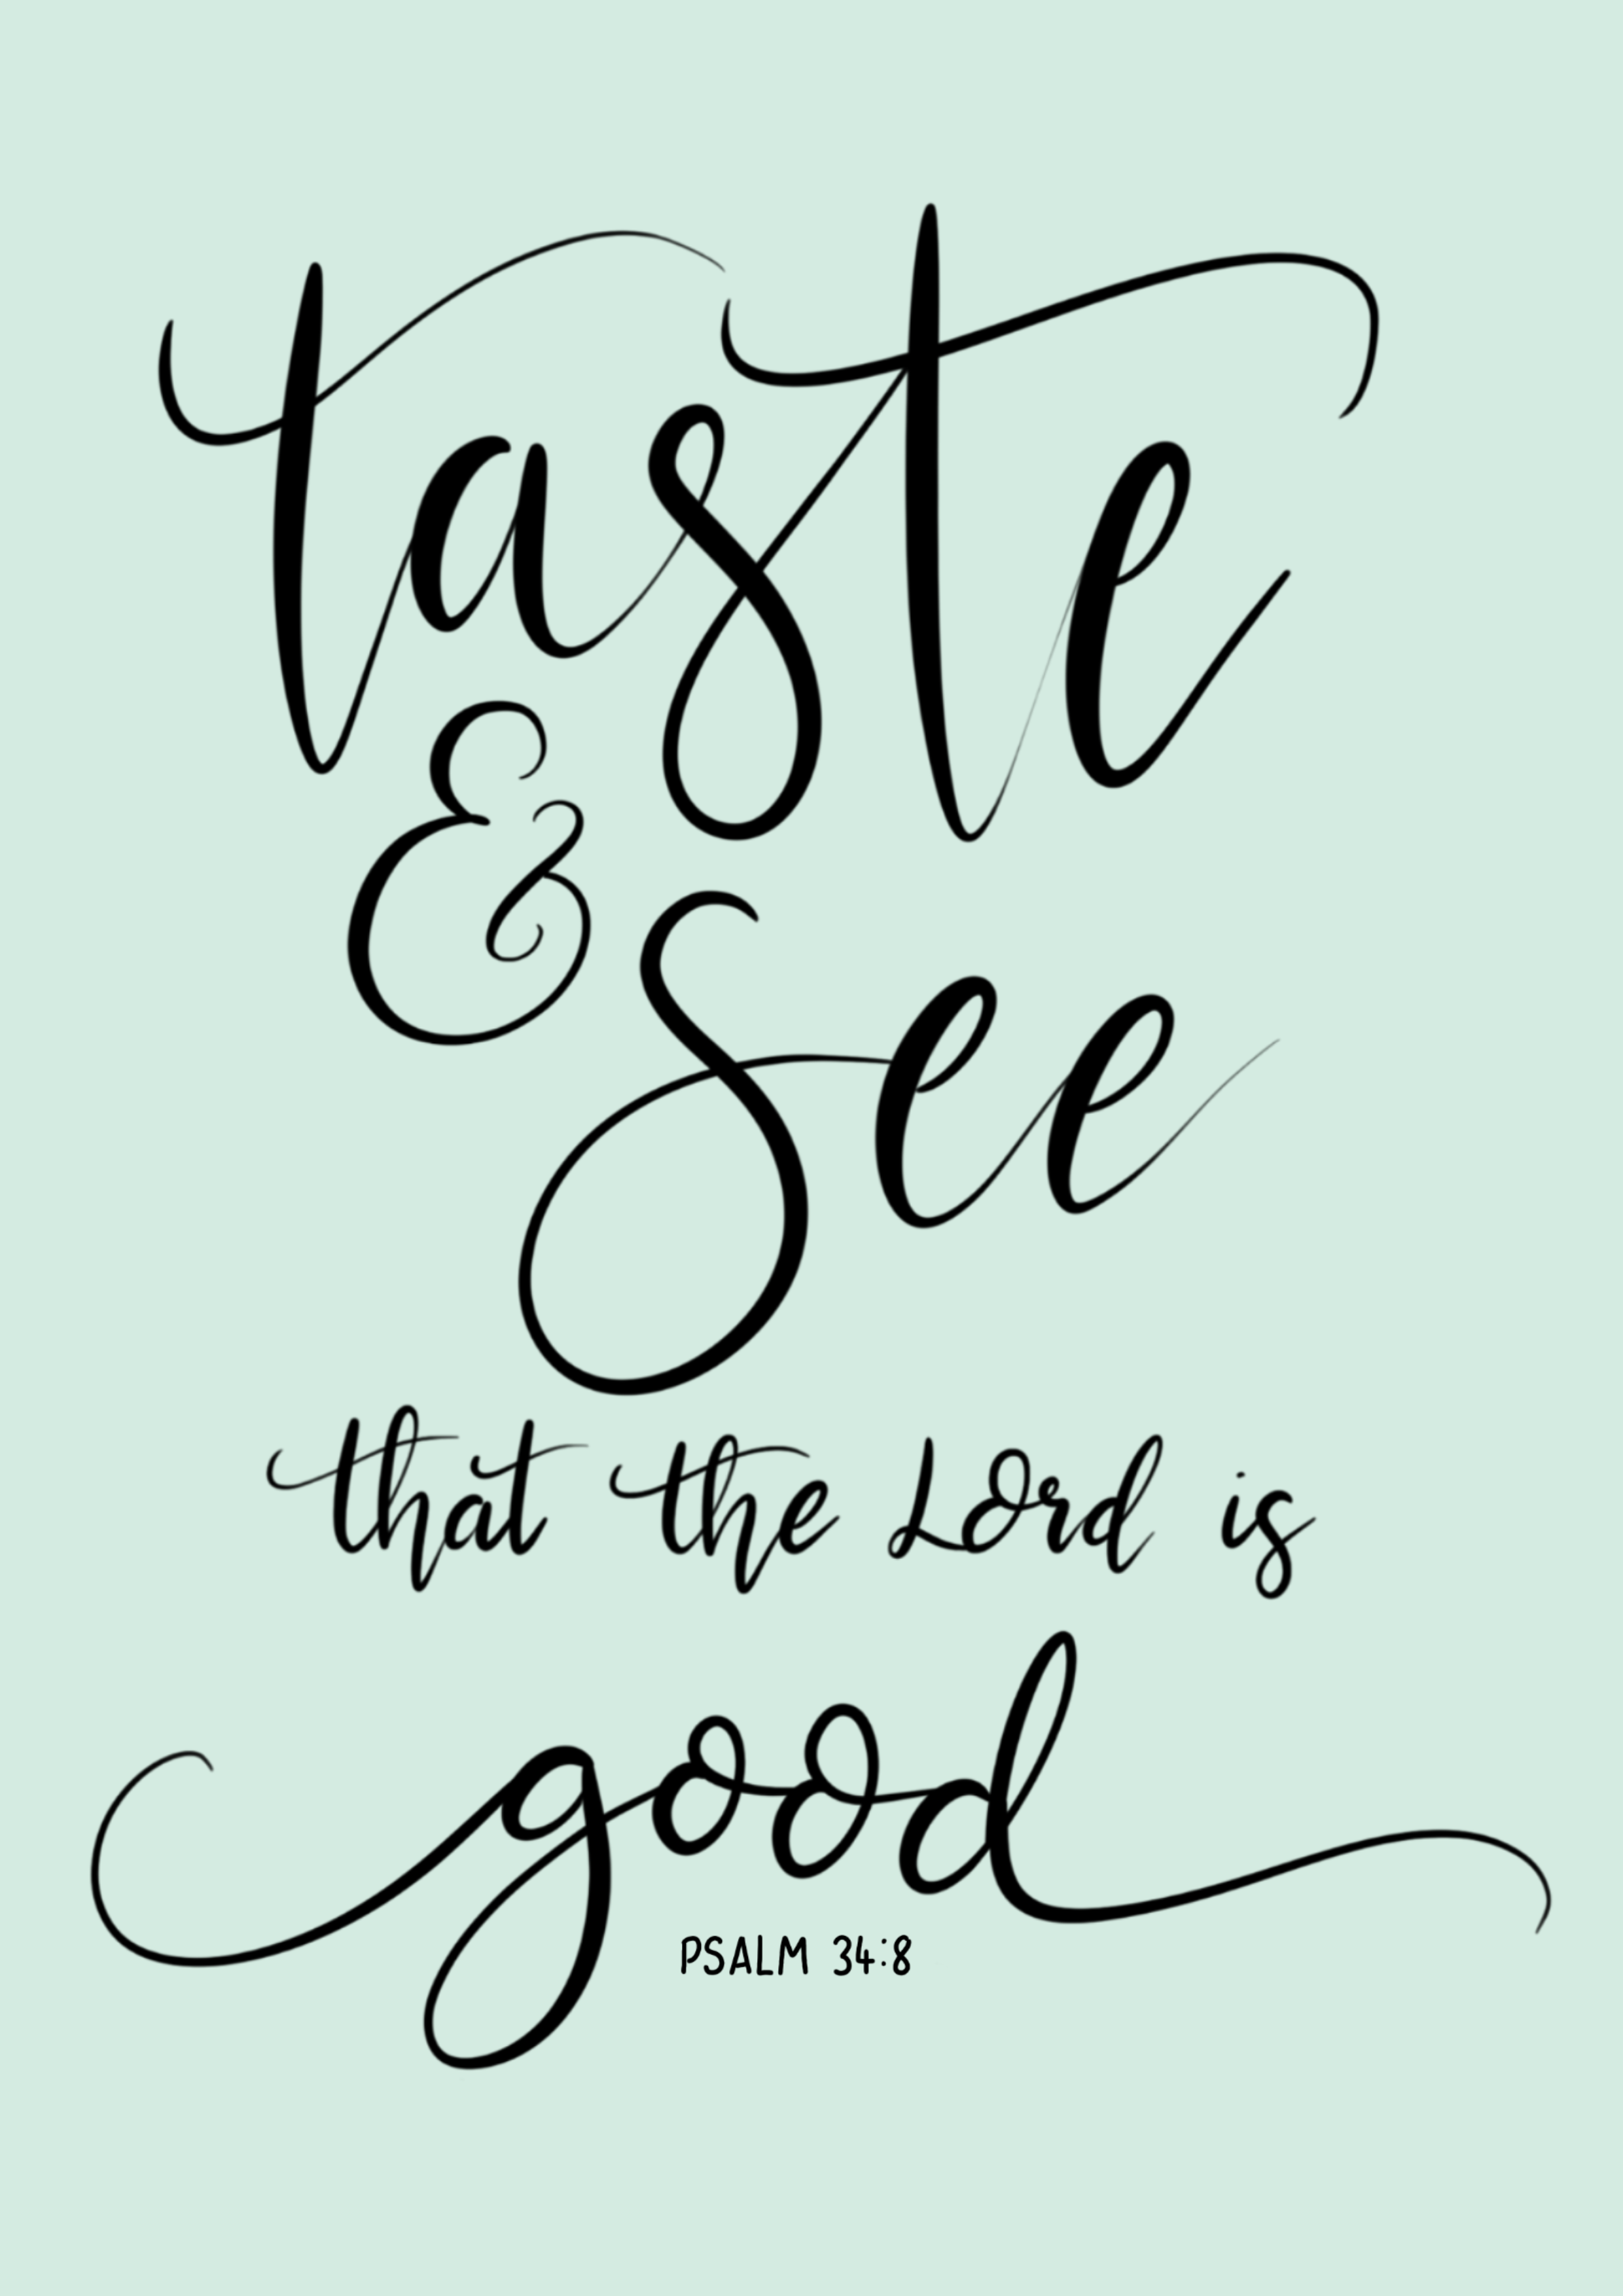 Taste And See That The Lord Is Good - What Does That Mean?